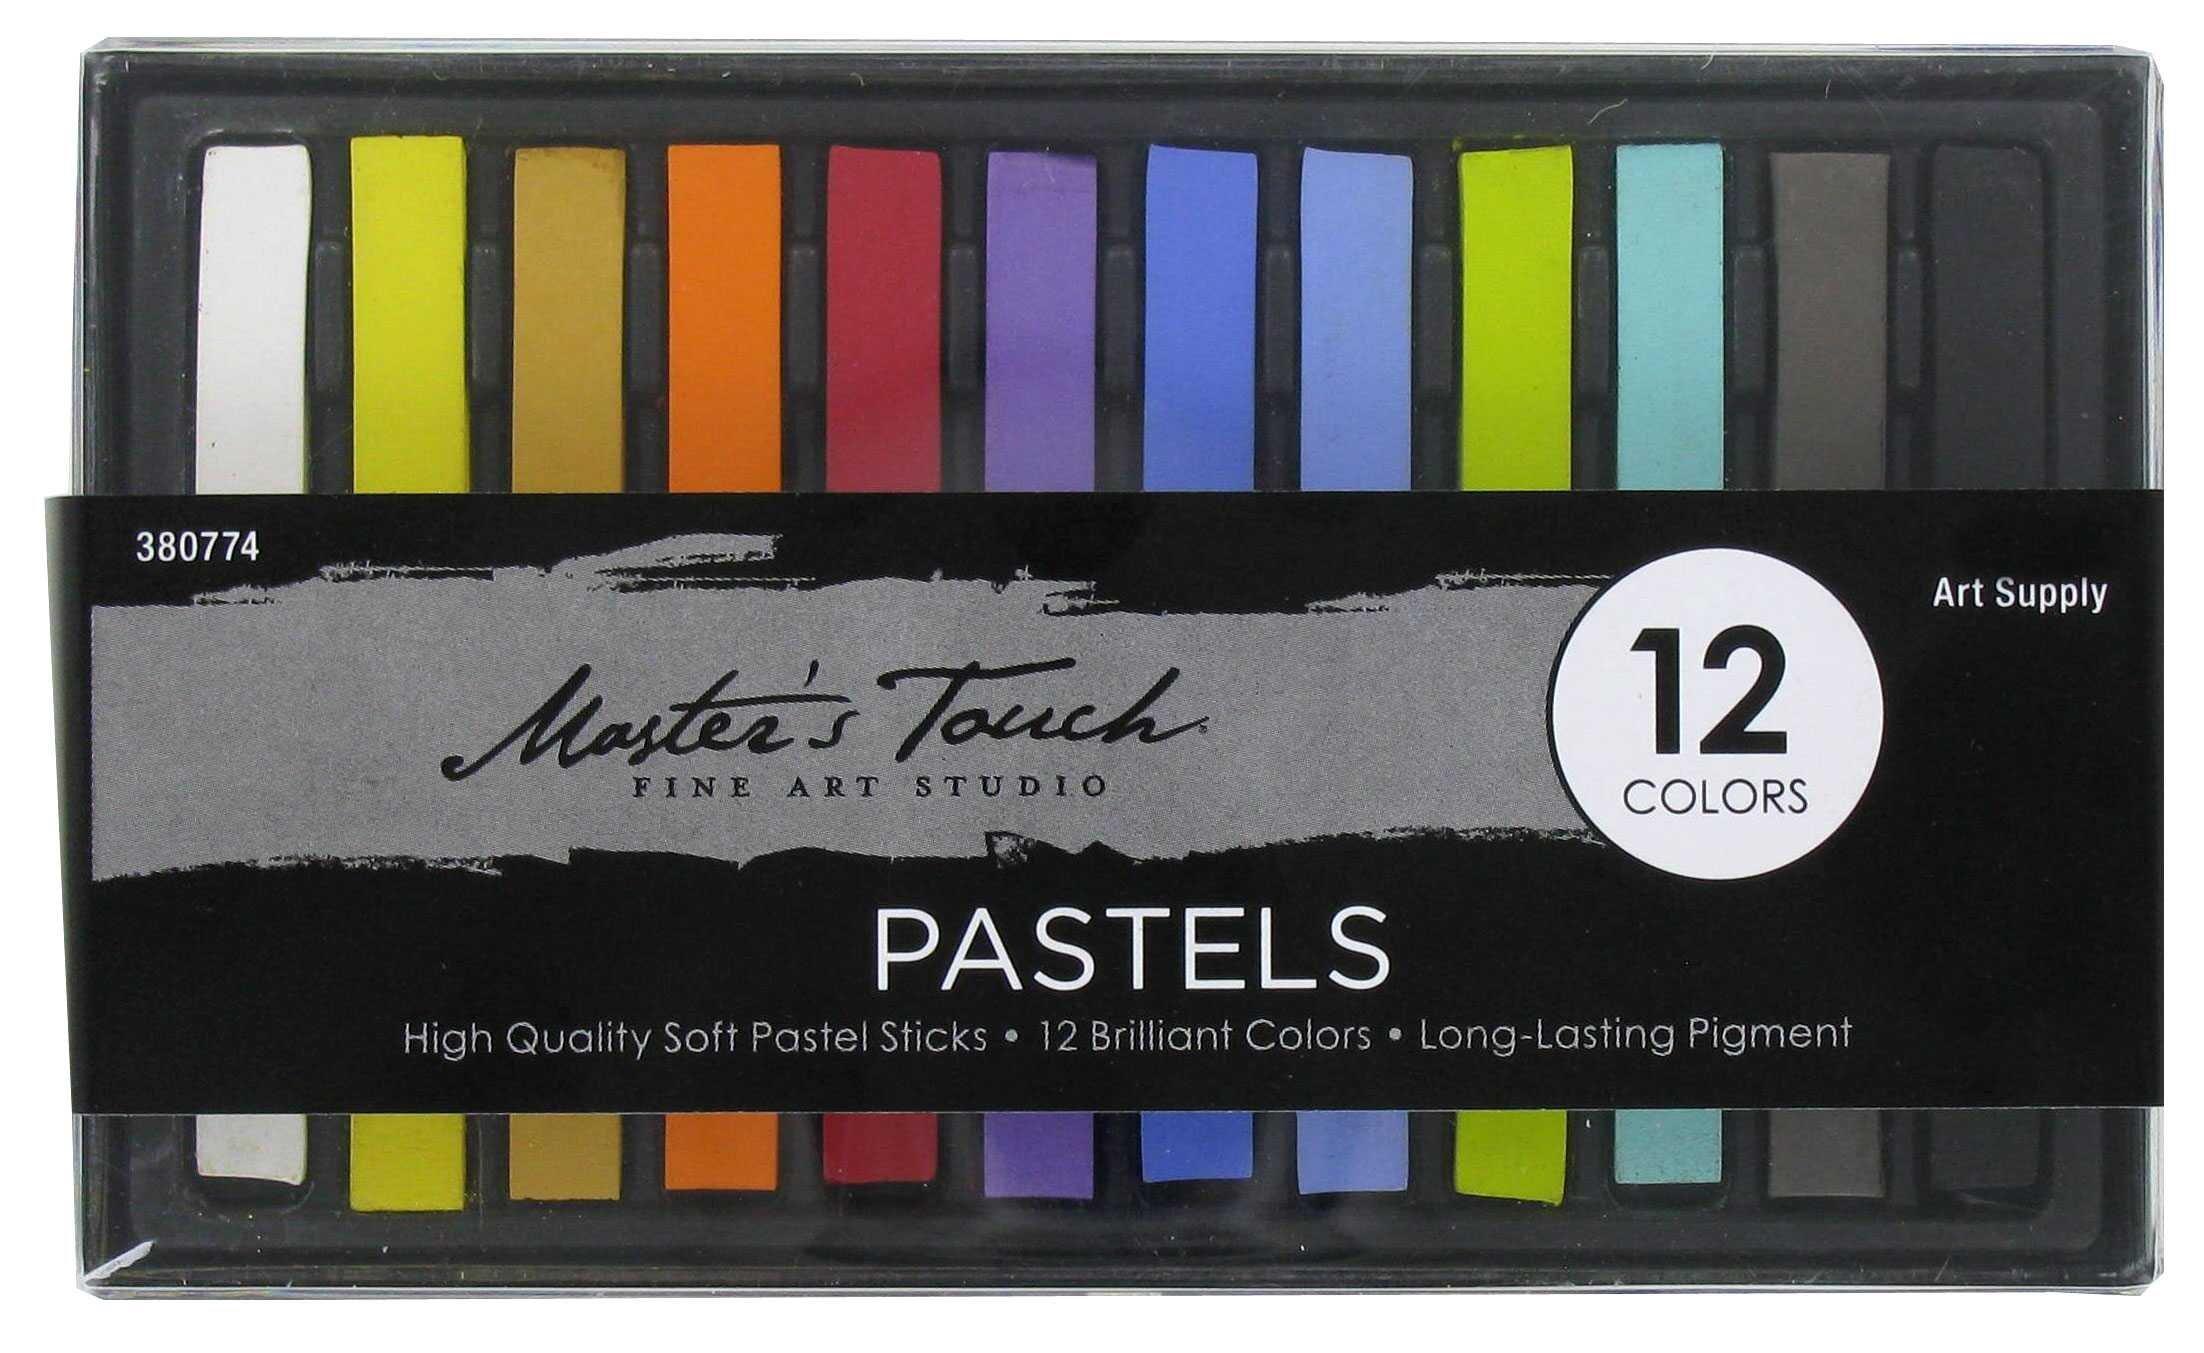 Master's Touch Drawing Pastels